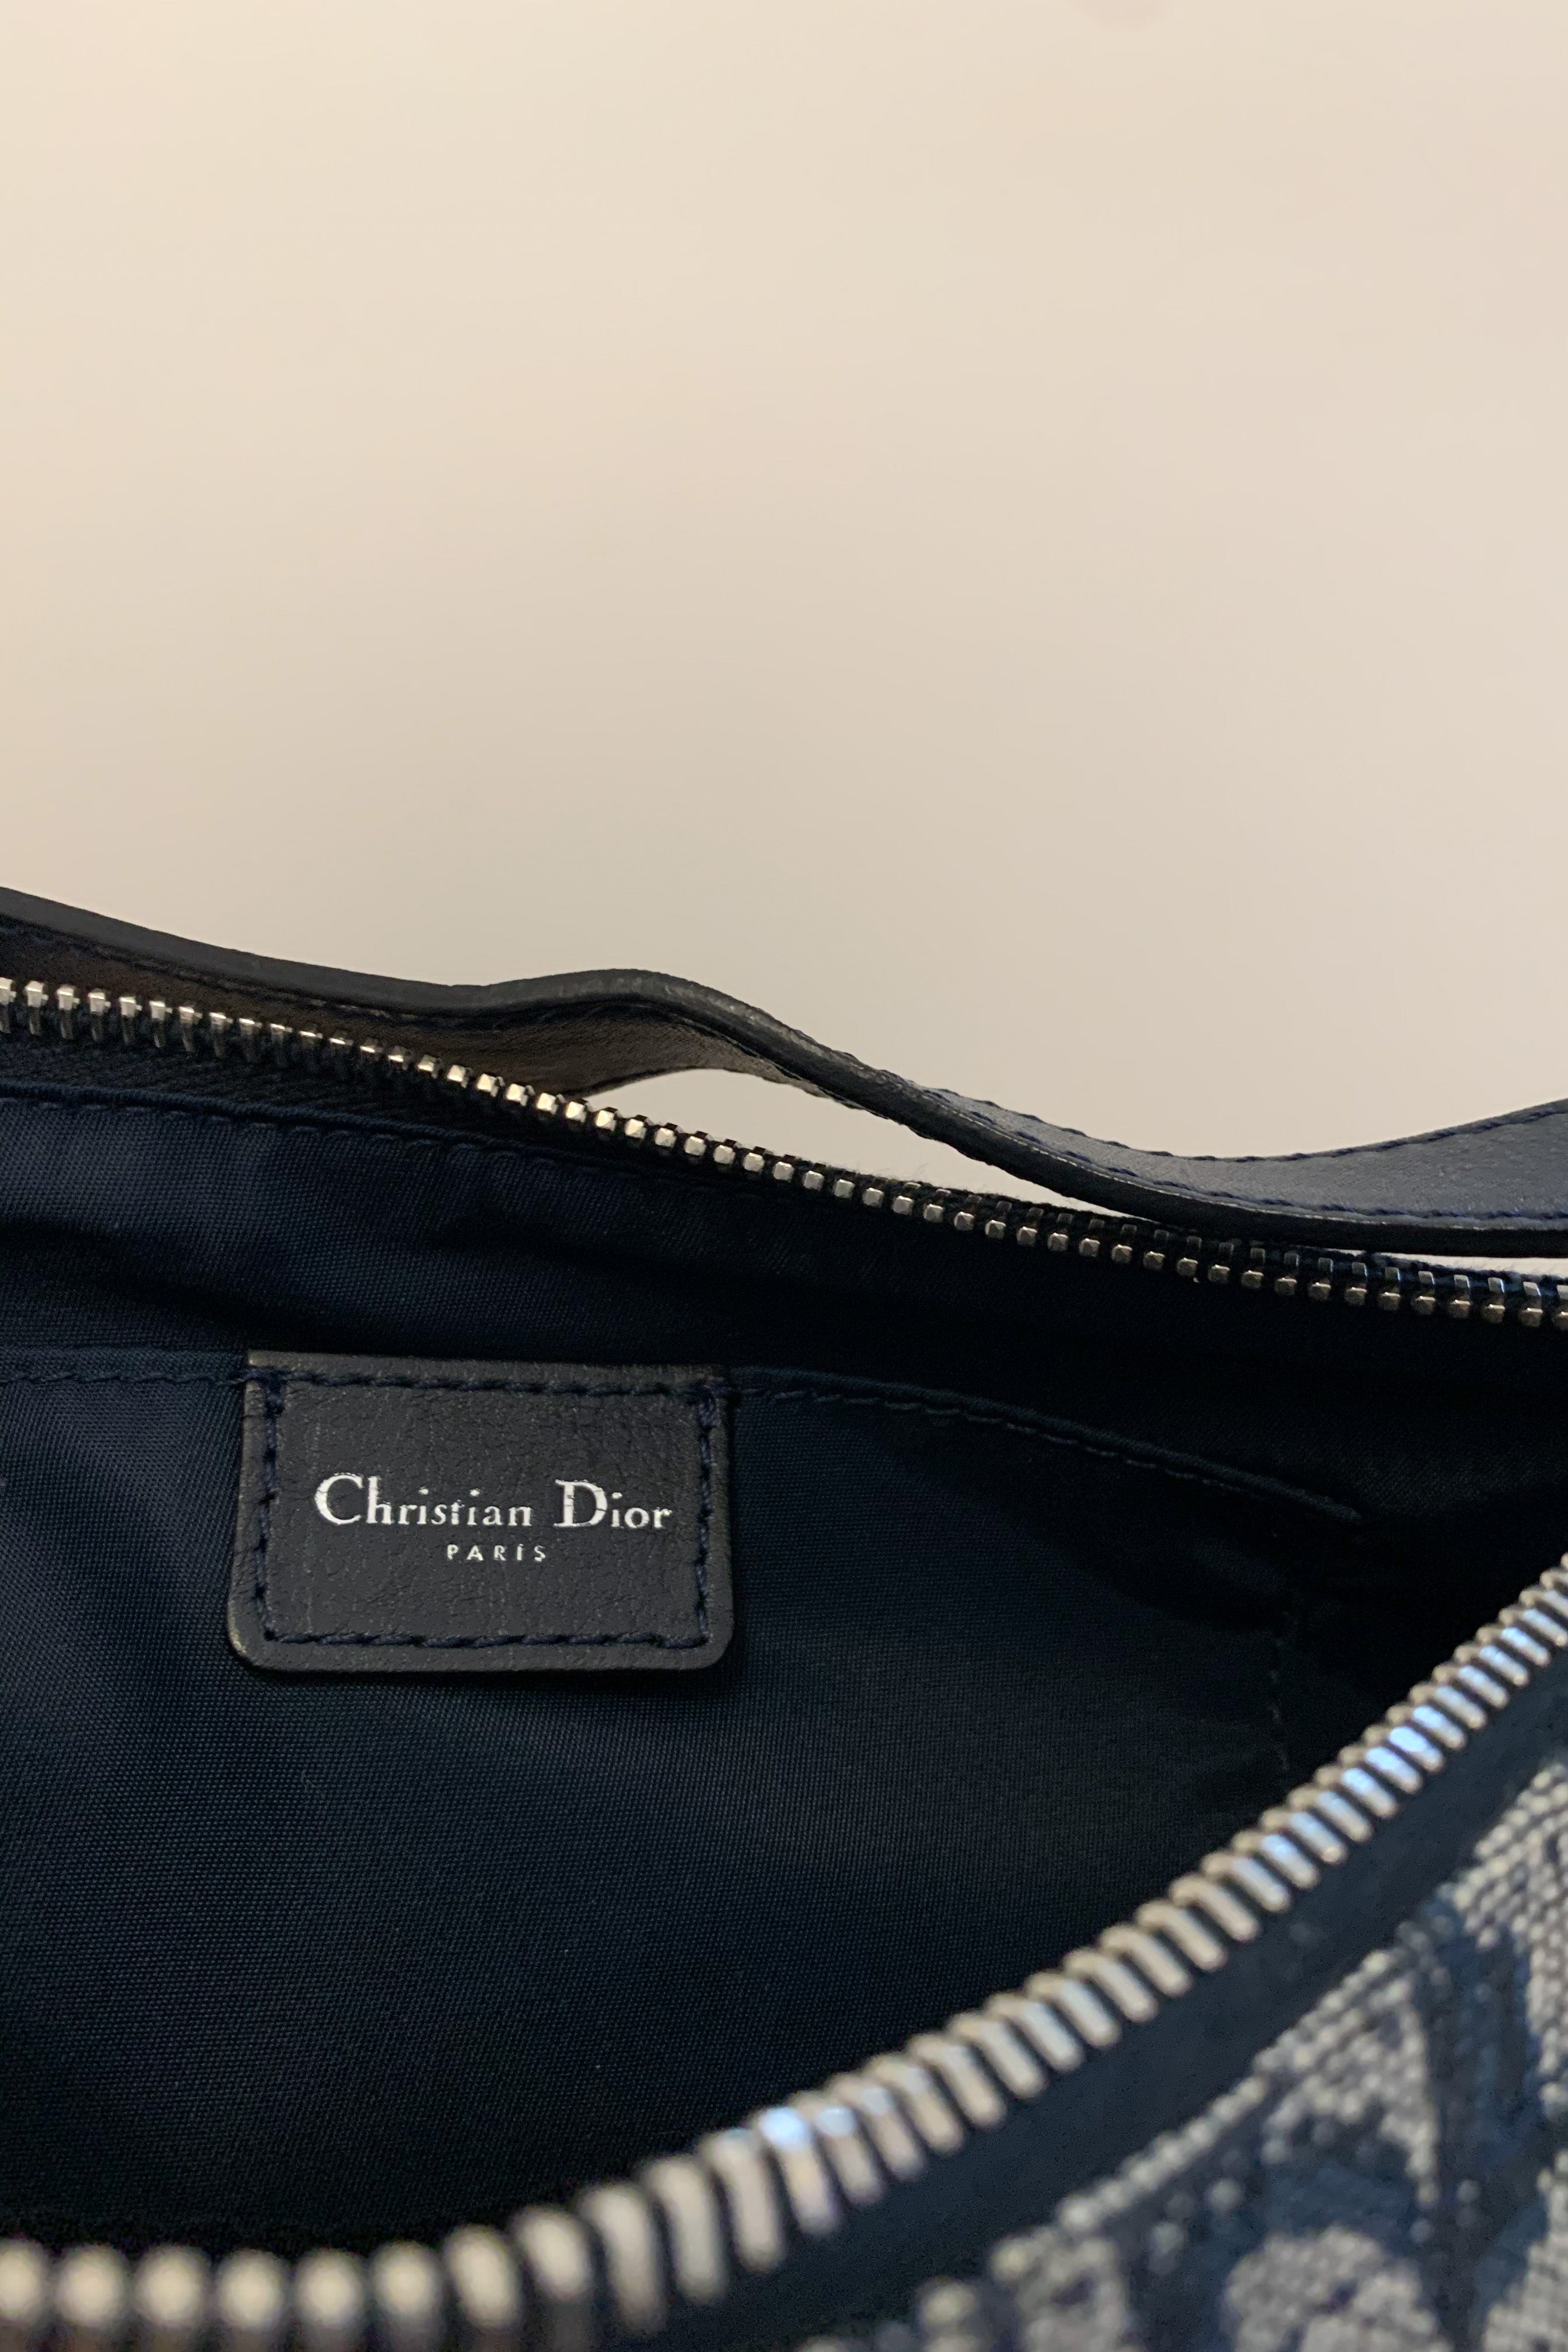 Christian Dior Monogram Spell Out Baguette